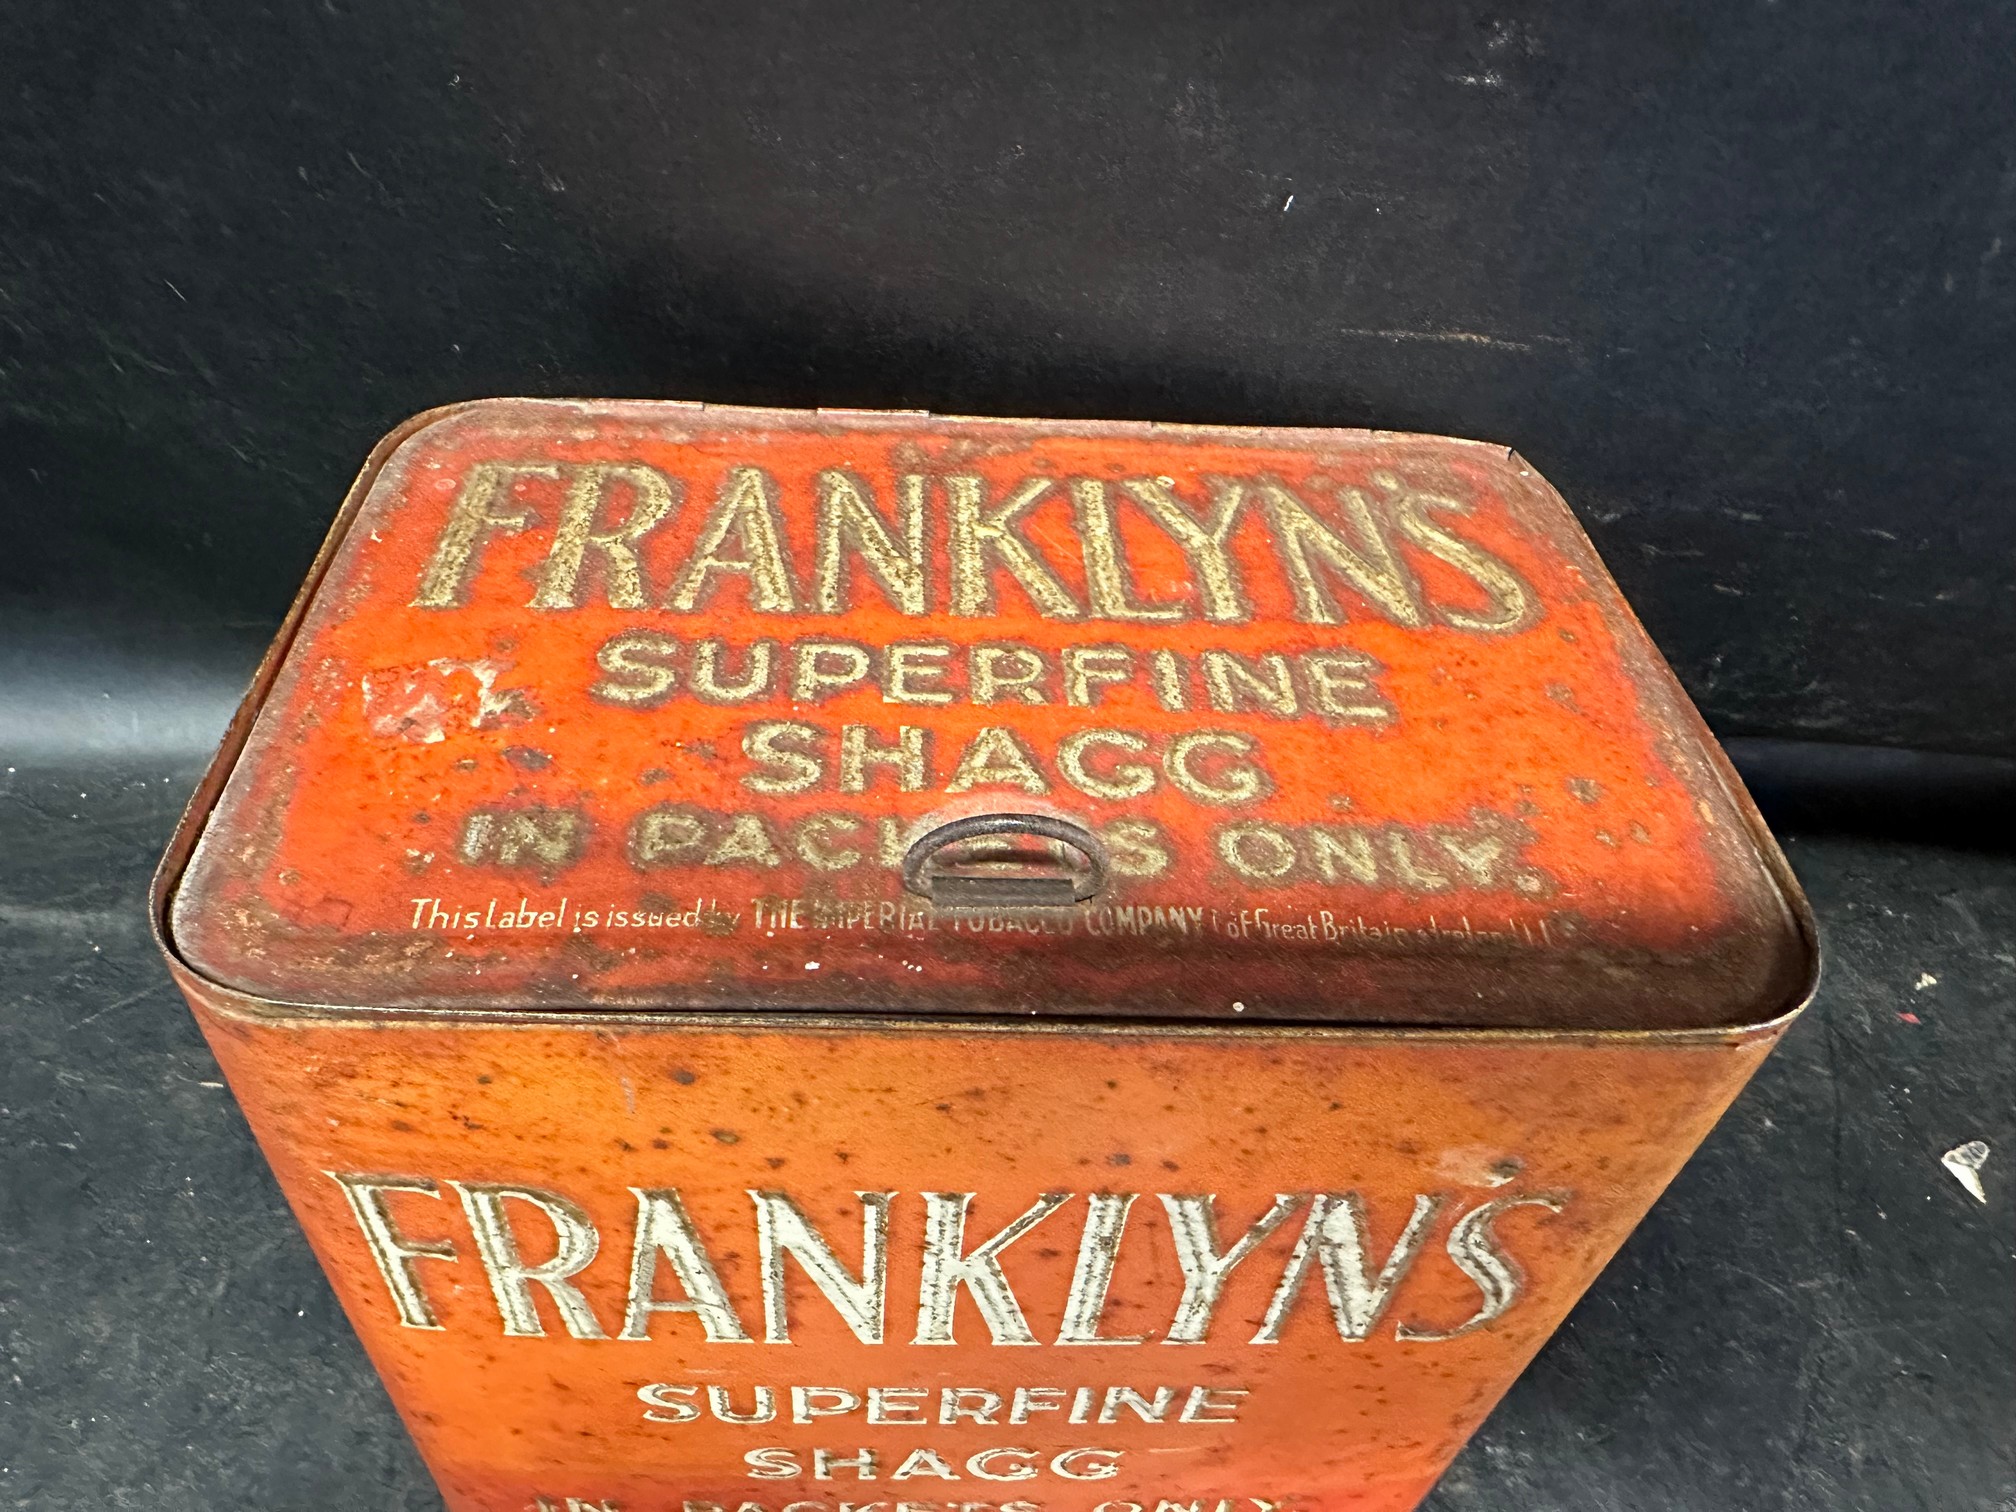 A Frankly's Superfine Shagg 'in packets only' counter box, issued by The Imperial Tobacco Co. - Image 3 of 8